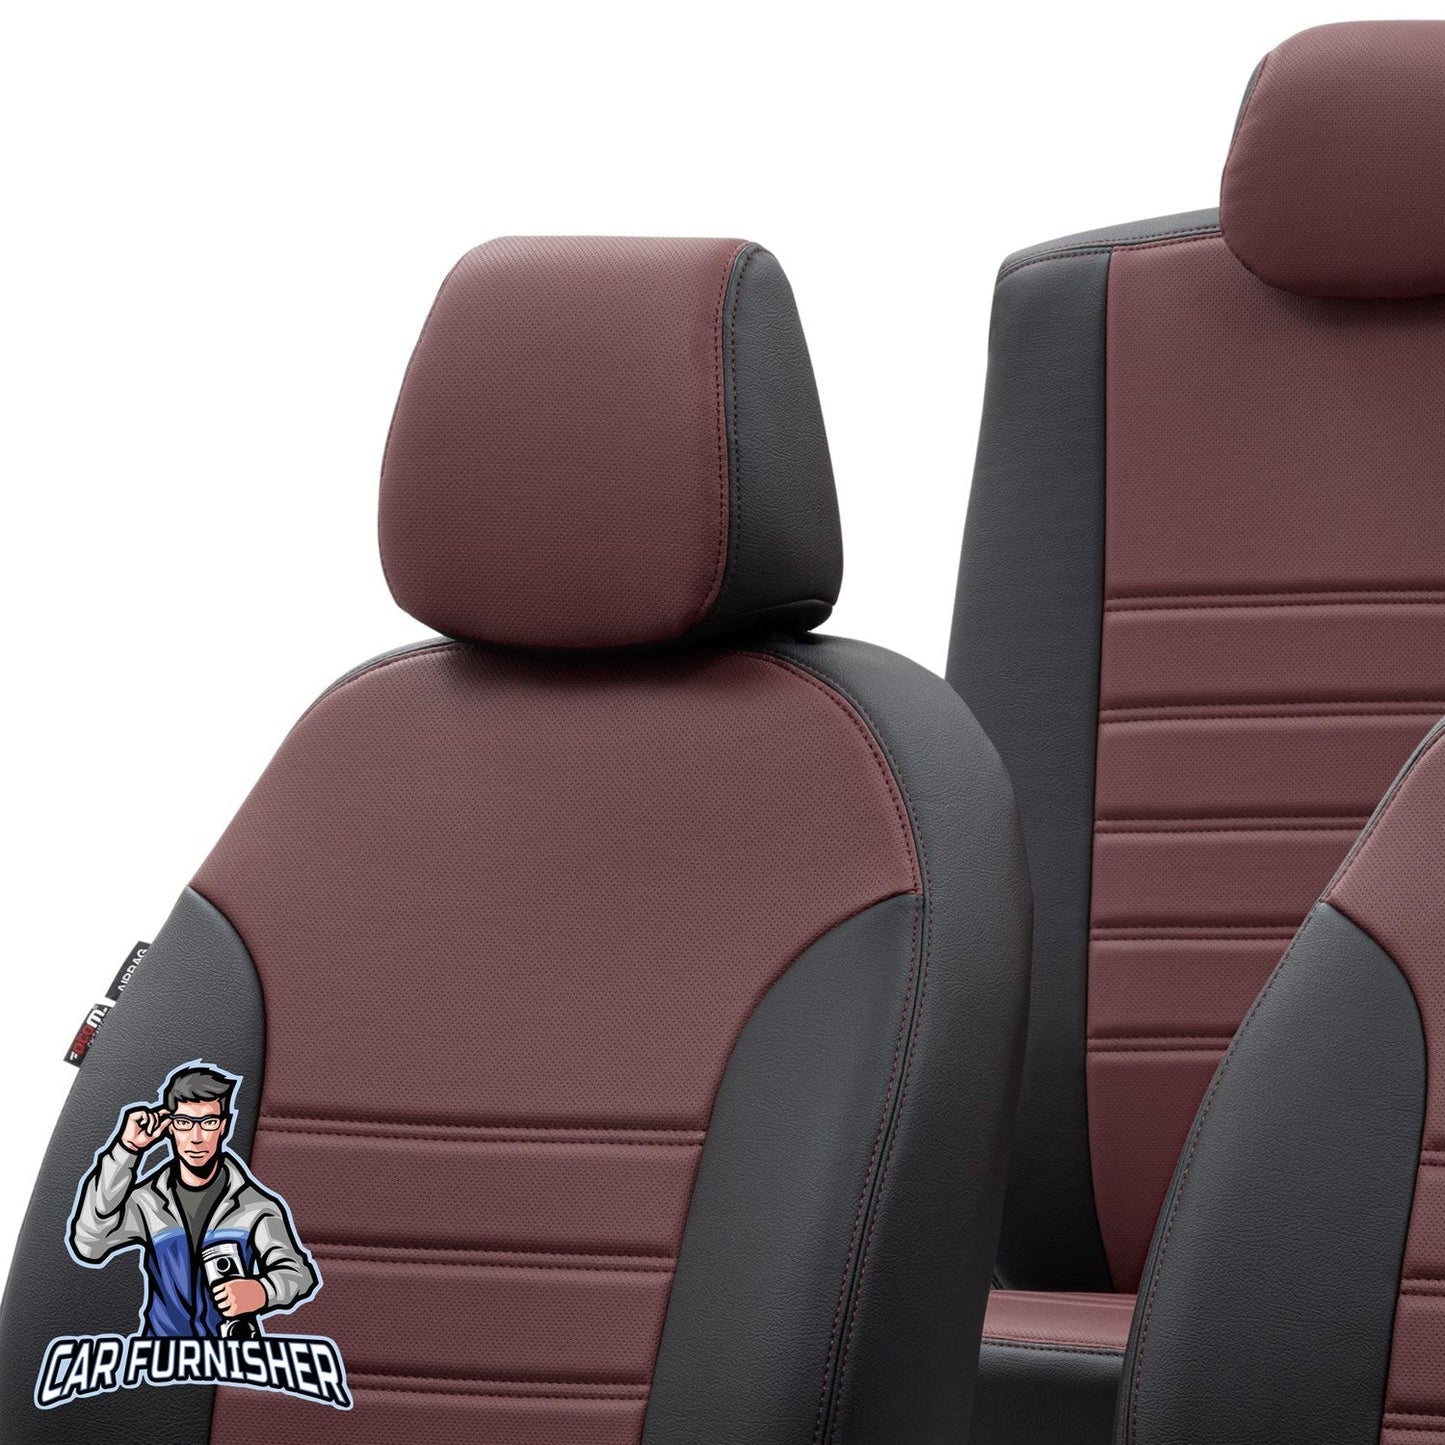 Peugeot 107 Seat Covers Istanbul Leather Design Burgundy Leather